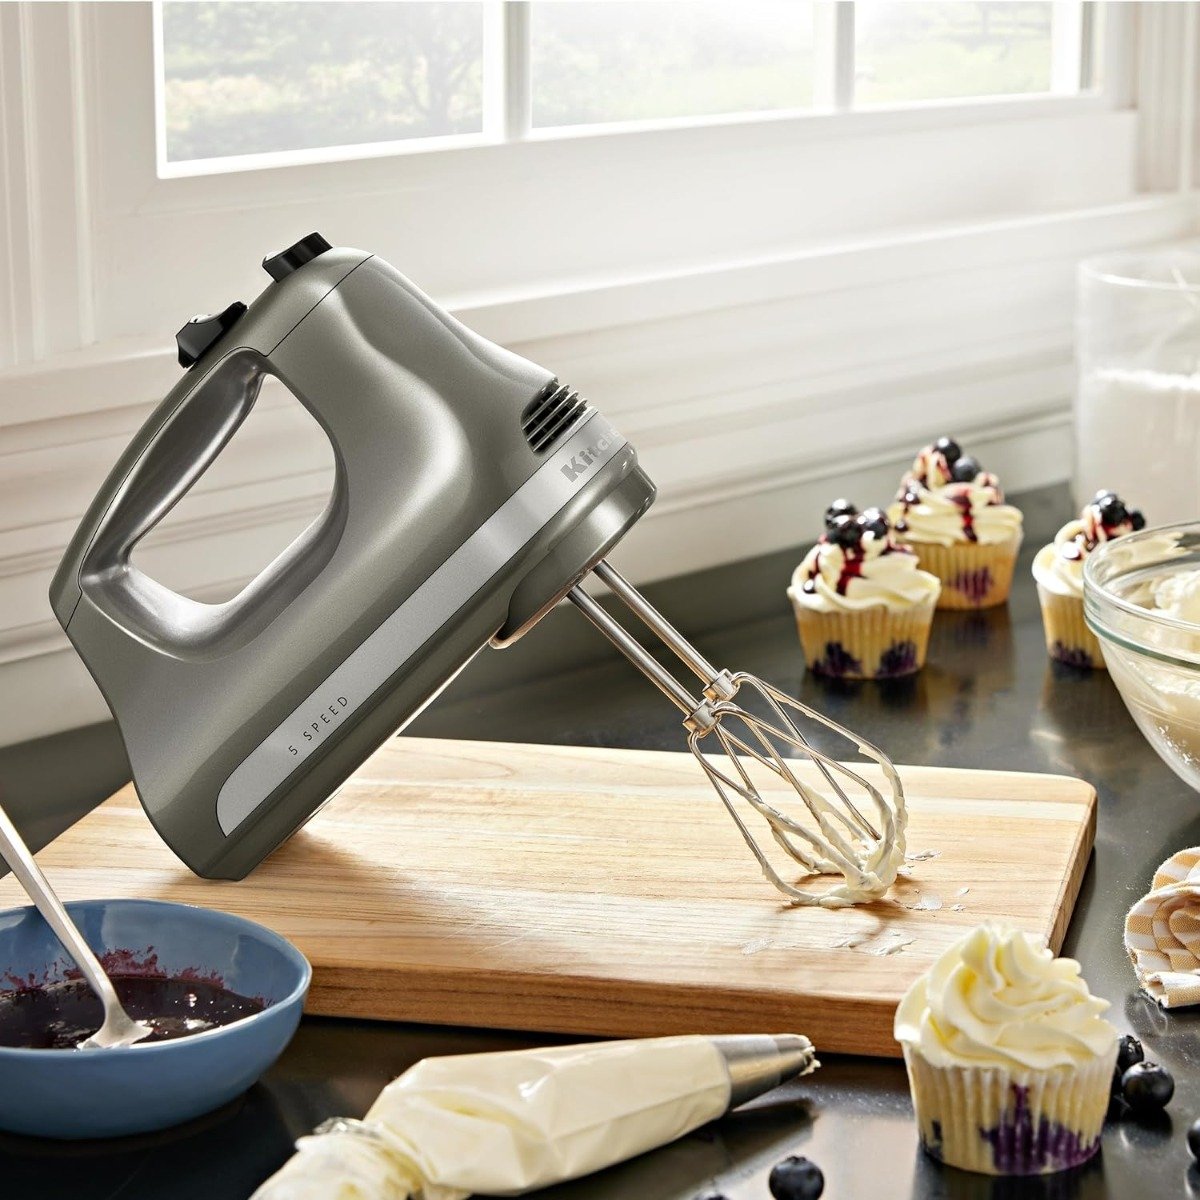 KitchenAid 5-Speed Ultra Power Hand Mixer | Contour Silver - image 4 of 4